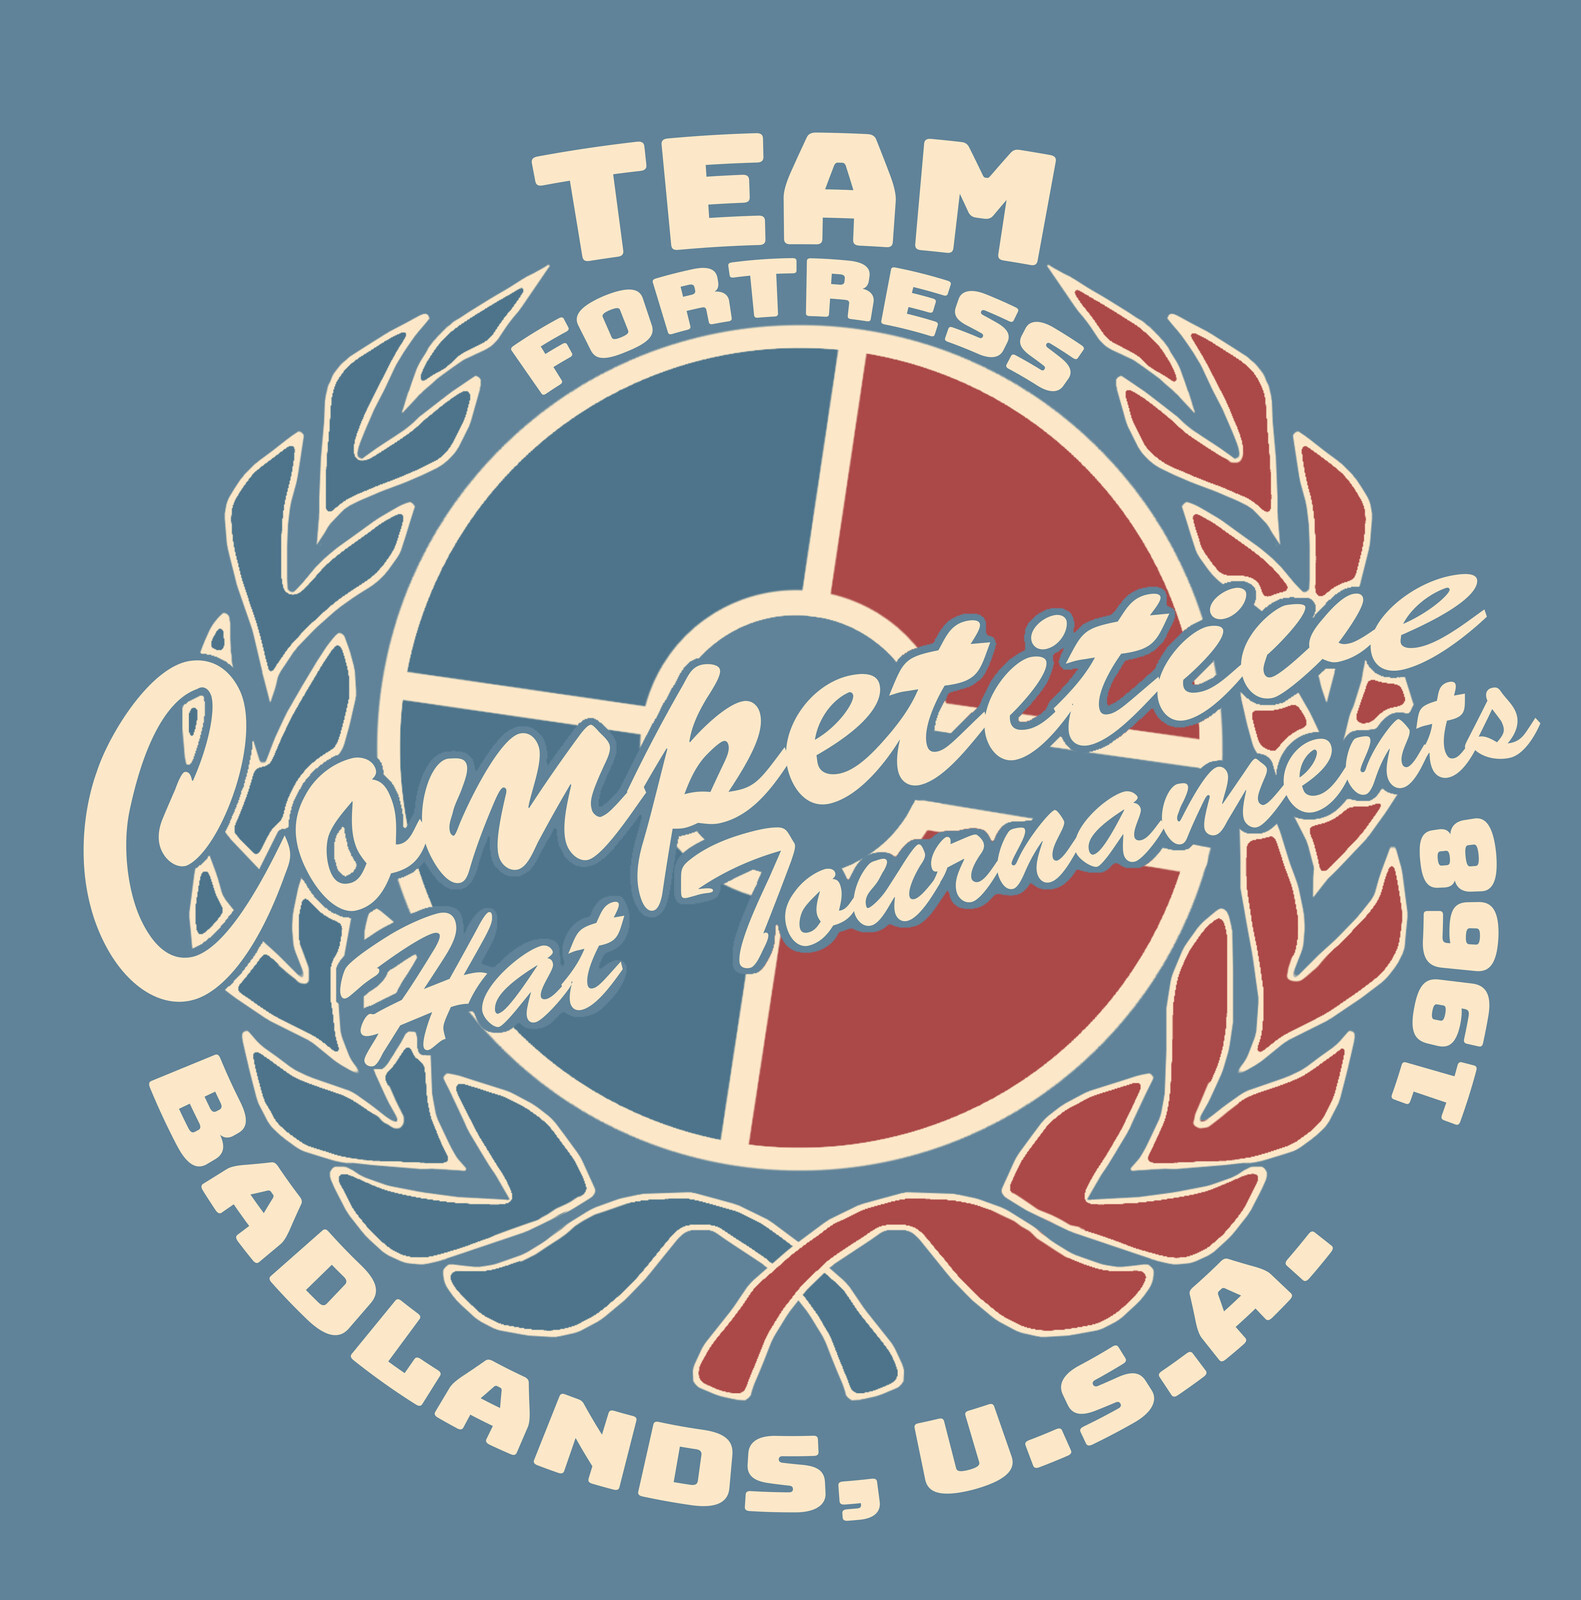 Team Fortress 2 - Competitive Hat Tournaments